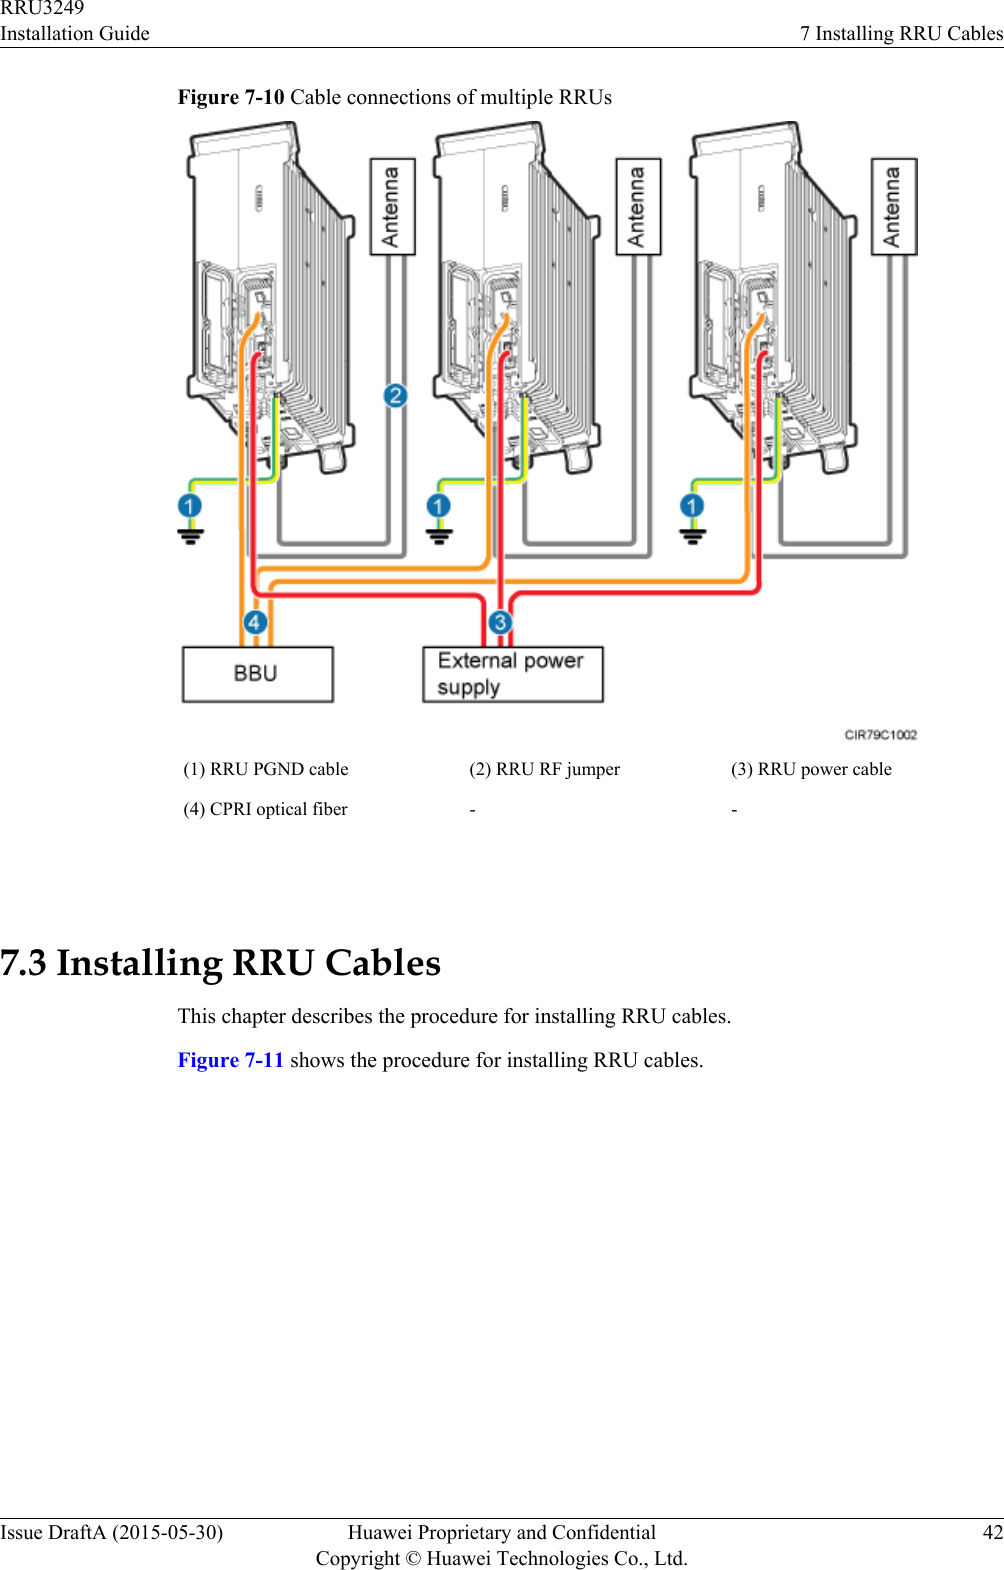 Figure 7-10 Cable connections of multiple RRUs(1) RRU PGND cable (2) RRU RF jumper (3) RRU power cable(4) CPRI optical fiber - - 7.3 Installing RRU CablesThis chapter describes the procedure for installing RRU cables.Figure 7-11 shows the procedure for installing RRU cables.RRU3249Installation Guide 7 Installing RRU CablesIssue DraftA (2015-05-30) Huawei Proprietary and ConfidentialCopyright © Huawei Technologies Co., Ltd.42